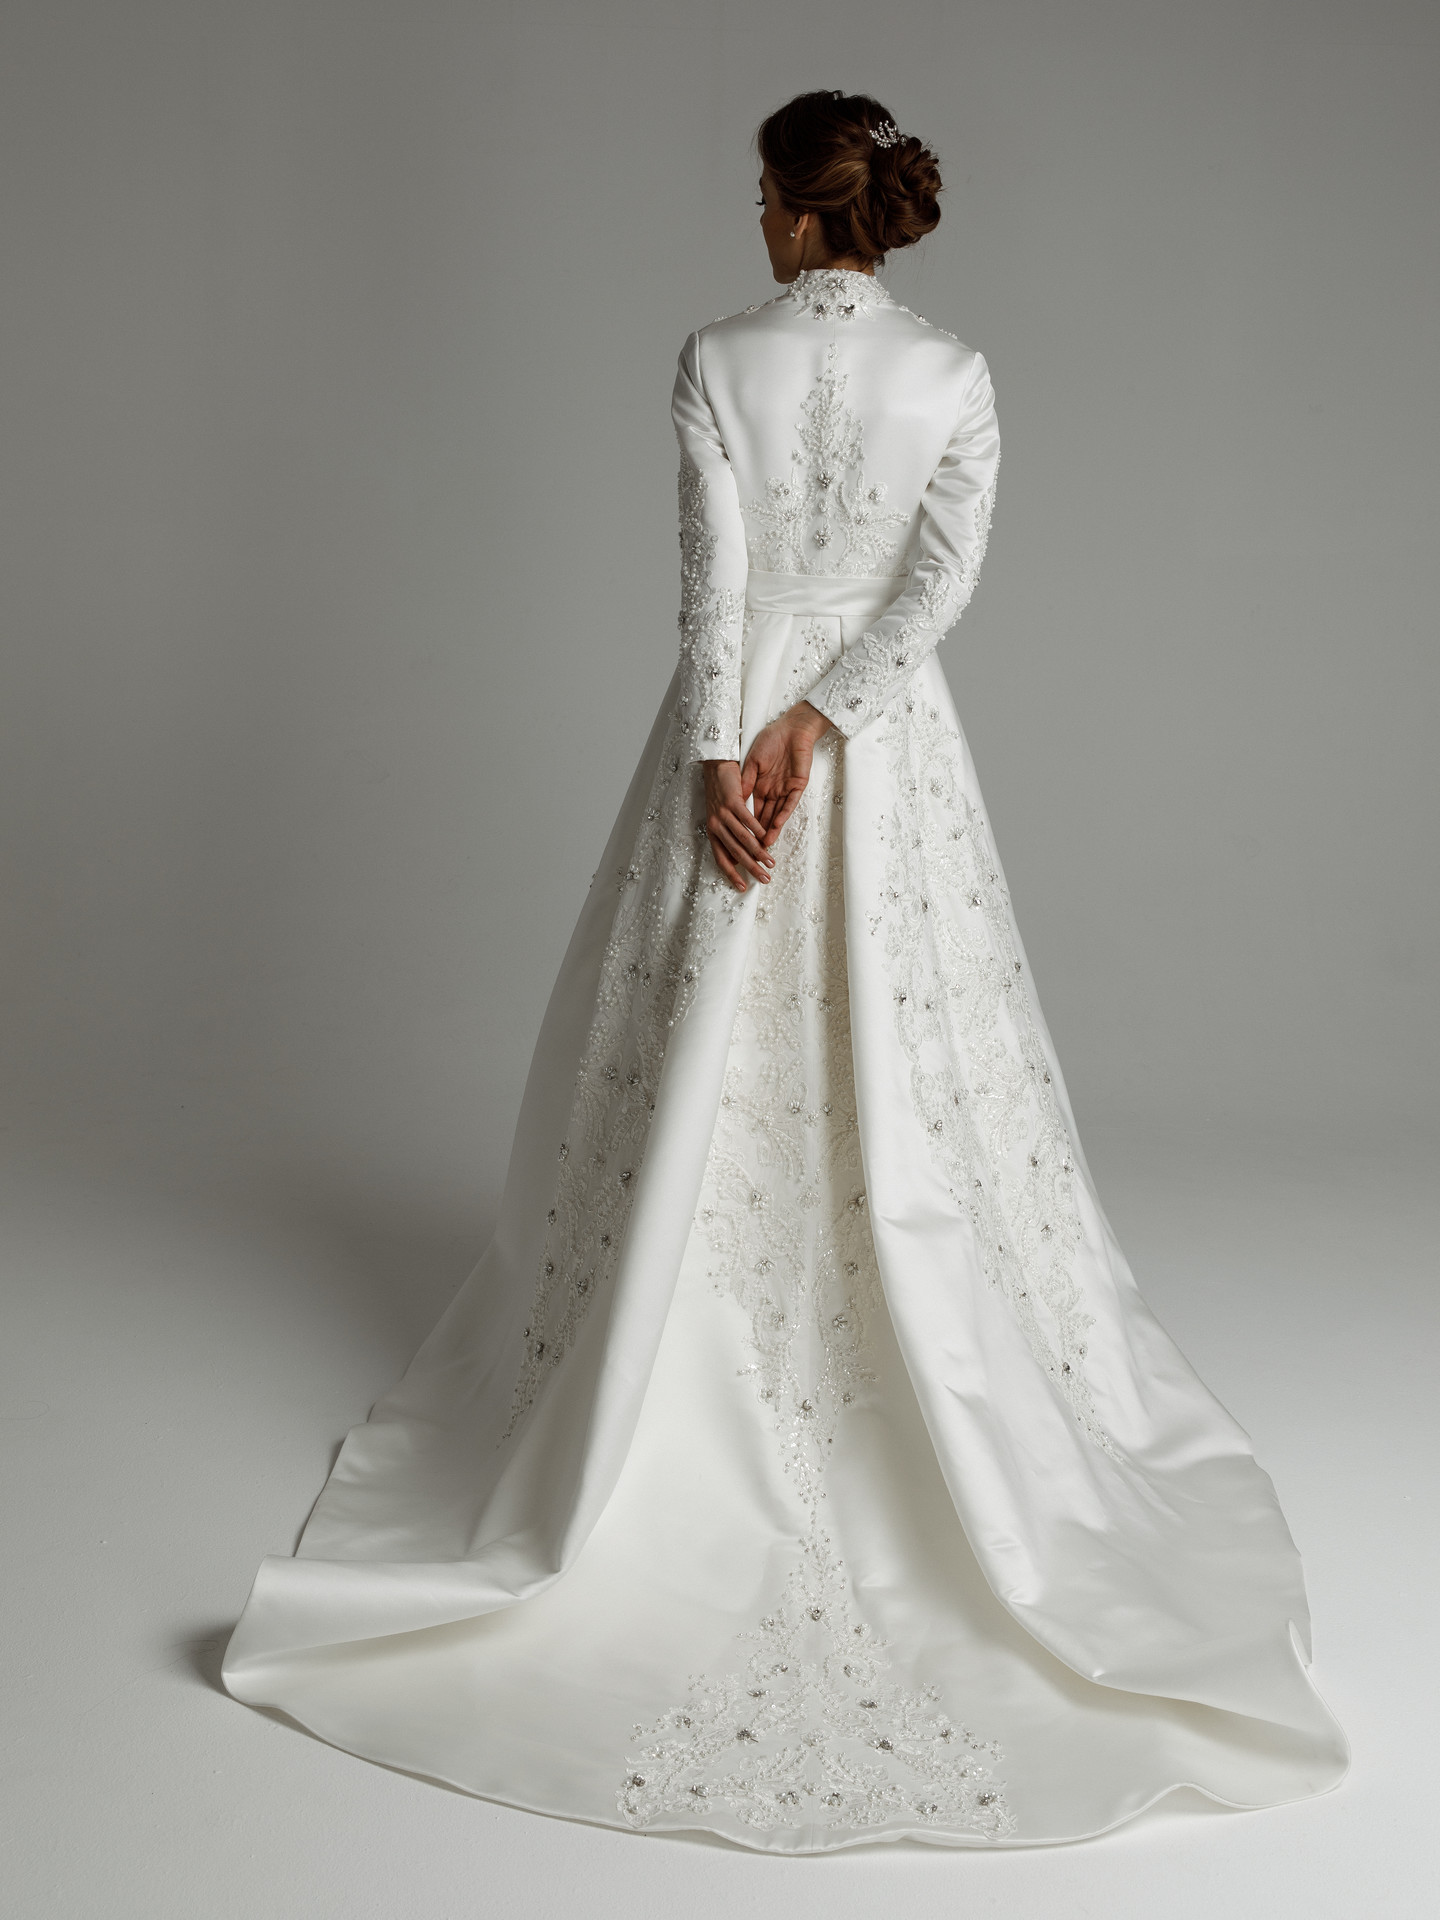 Gertrude gown, 2021, couture, dress, bridal, off-white, satin, embroidery, A-line, train, sleeves, lace